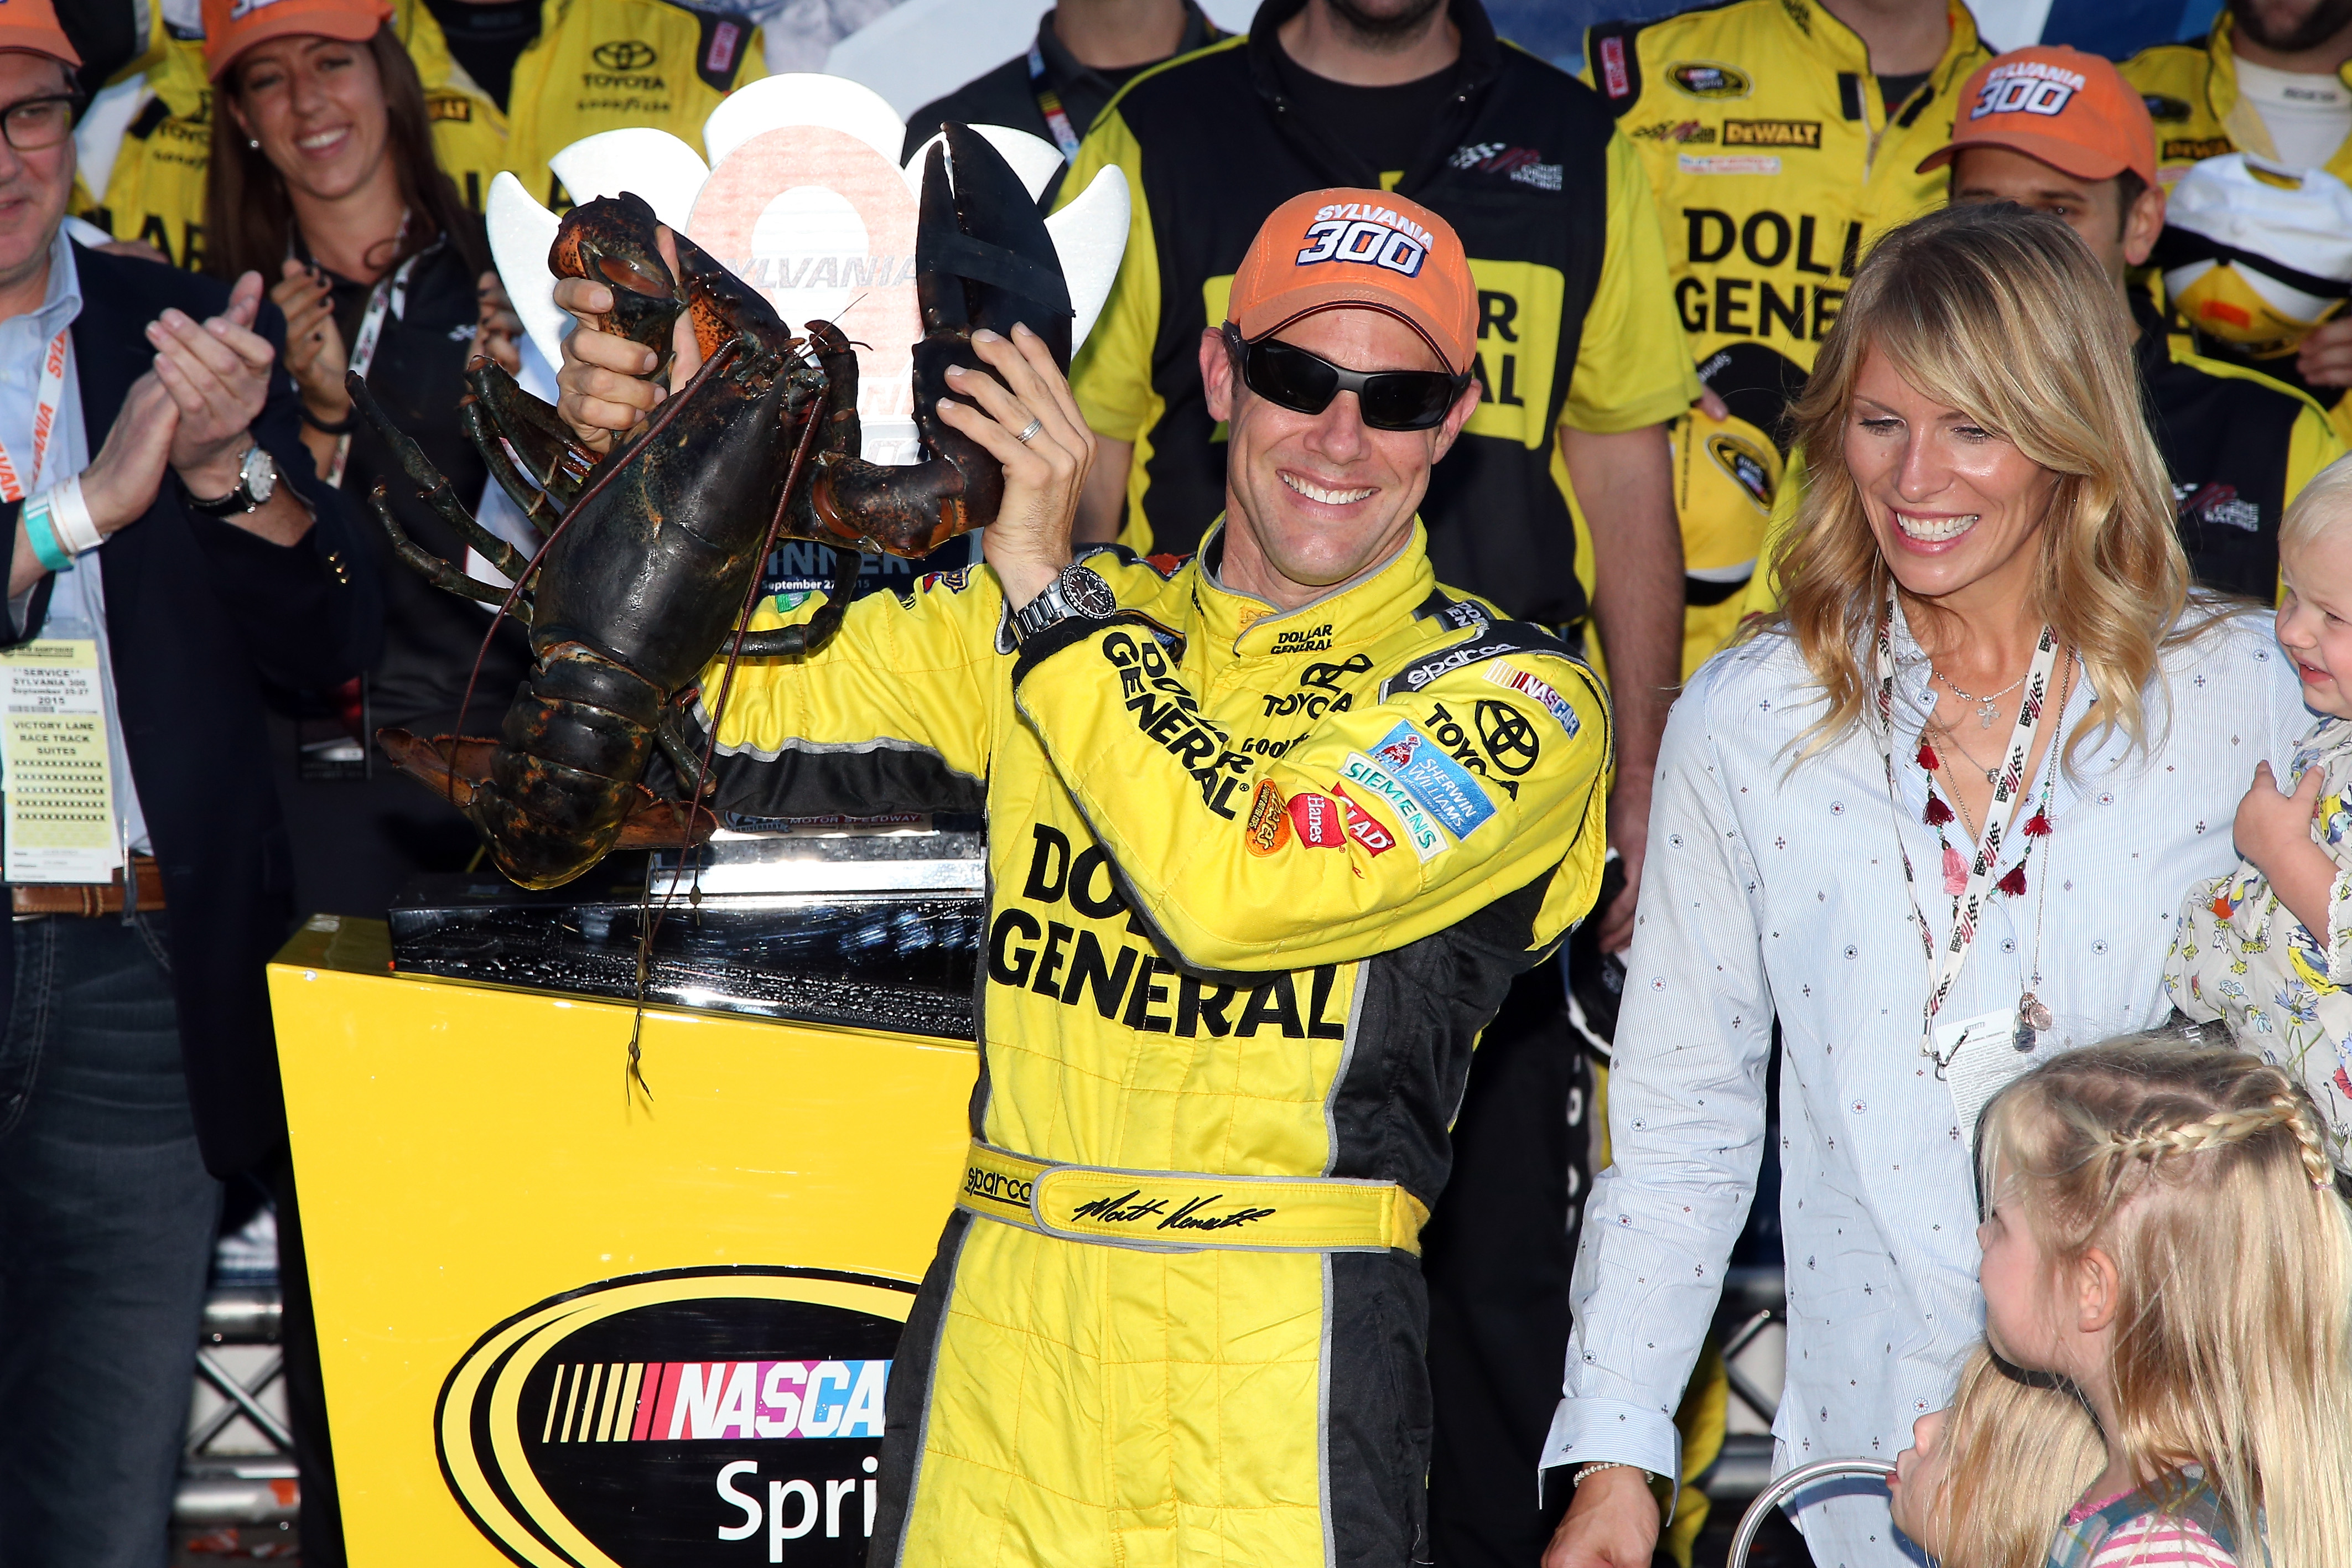 LOUDON, NH - SEPTEMBER 27: Matt Kenseth, driver of the #20 Dollar General Toyota, celebrates in Victory Lane with a lobster after winning the NASCAR Sprint Cup Series SYLVANIA 300 at New Hampshire Motor Speedway on September 27, 2015 in Loudon, New Hampshire. (Photo by Sean Gardner/Getty Images) ORG XMIT: 580820657 ORIG FILE ID: 490335840